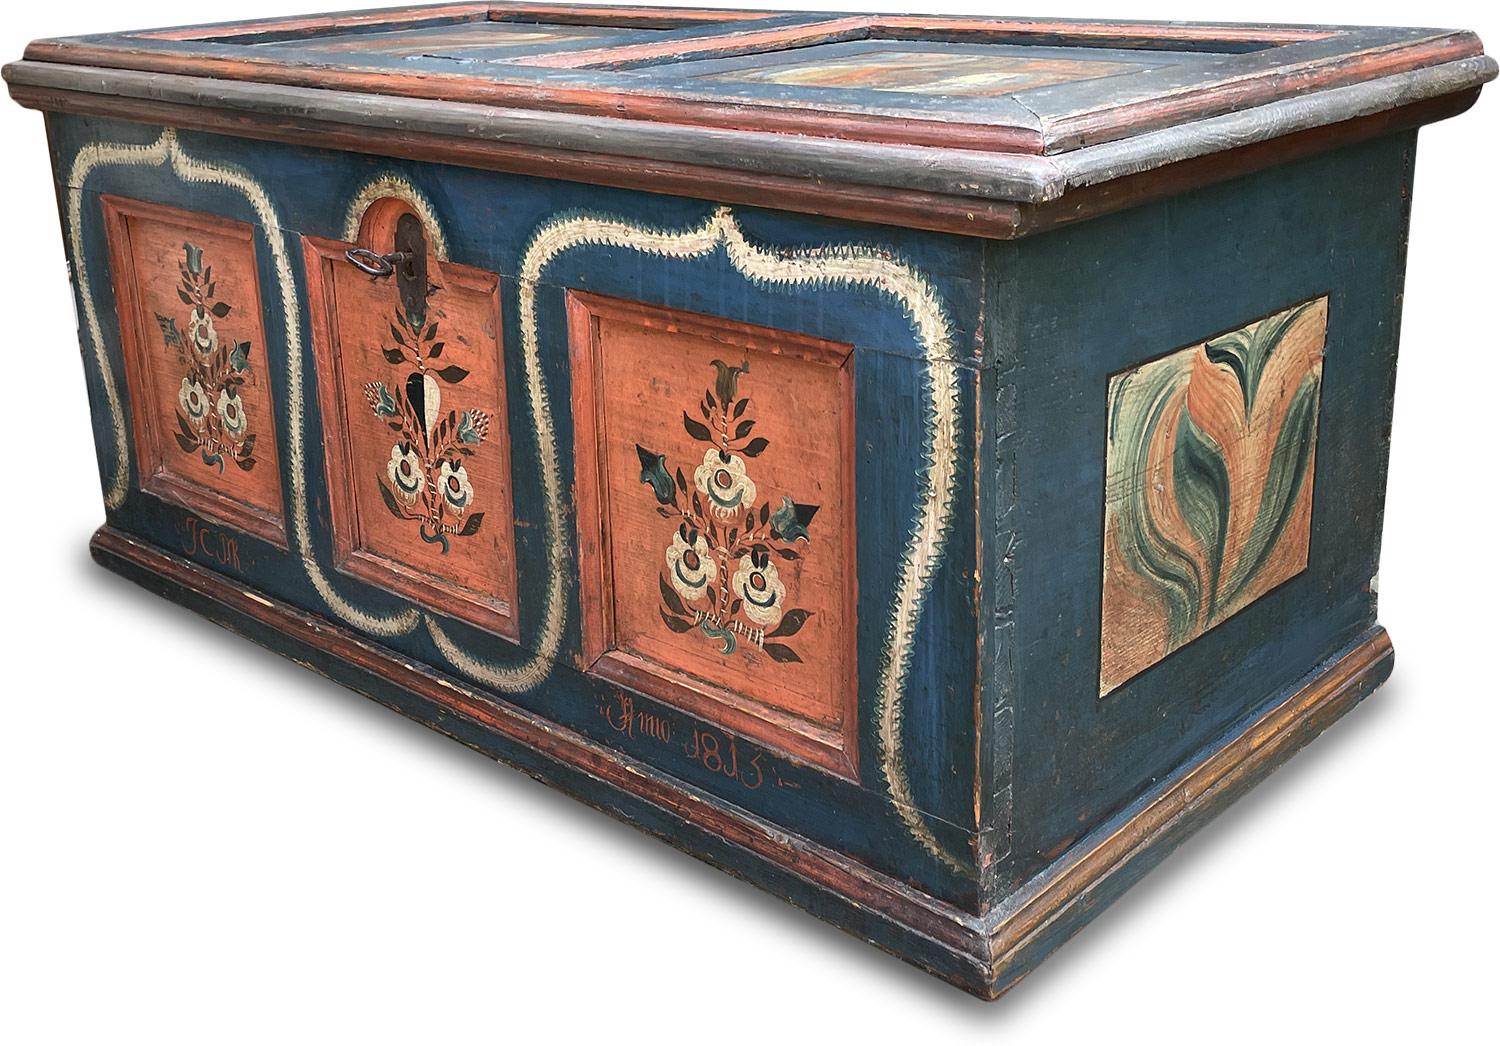 Blue Tyrolean chest dated 1815

H.63 - W.130 - D.67
Fir chest entirely painted in an intense blue color, in excellent condition.
On the front there are three framed panels, antique pink, containing floral motifs. At the bottom, the initials of the